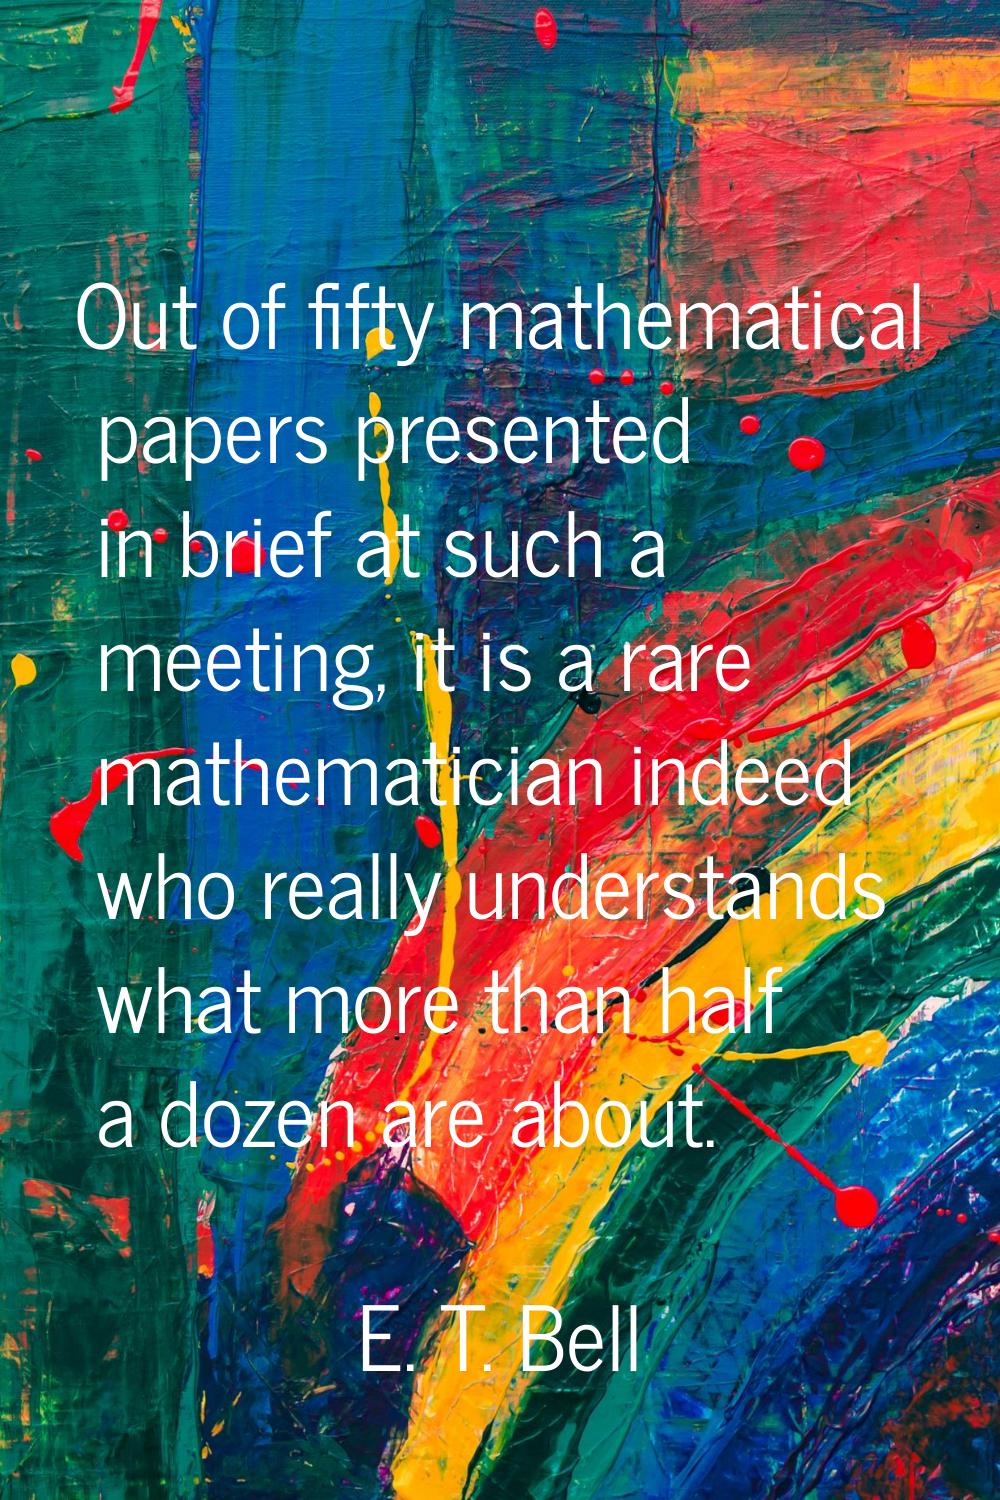 Out of fifty mathematical papers presented in brief at such a meeting, it is a rare mathematician i